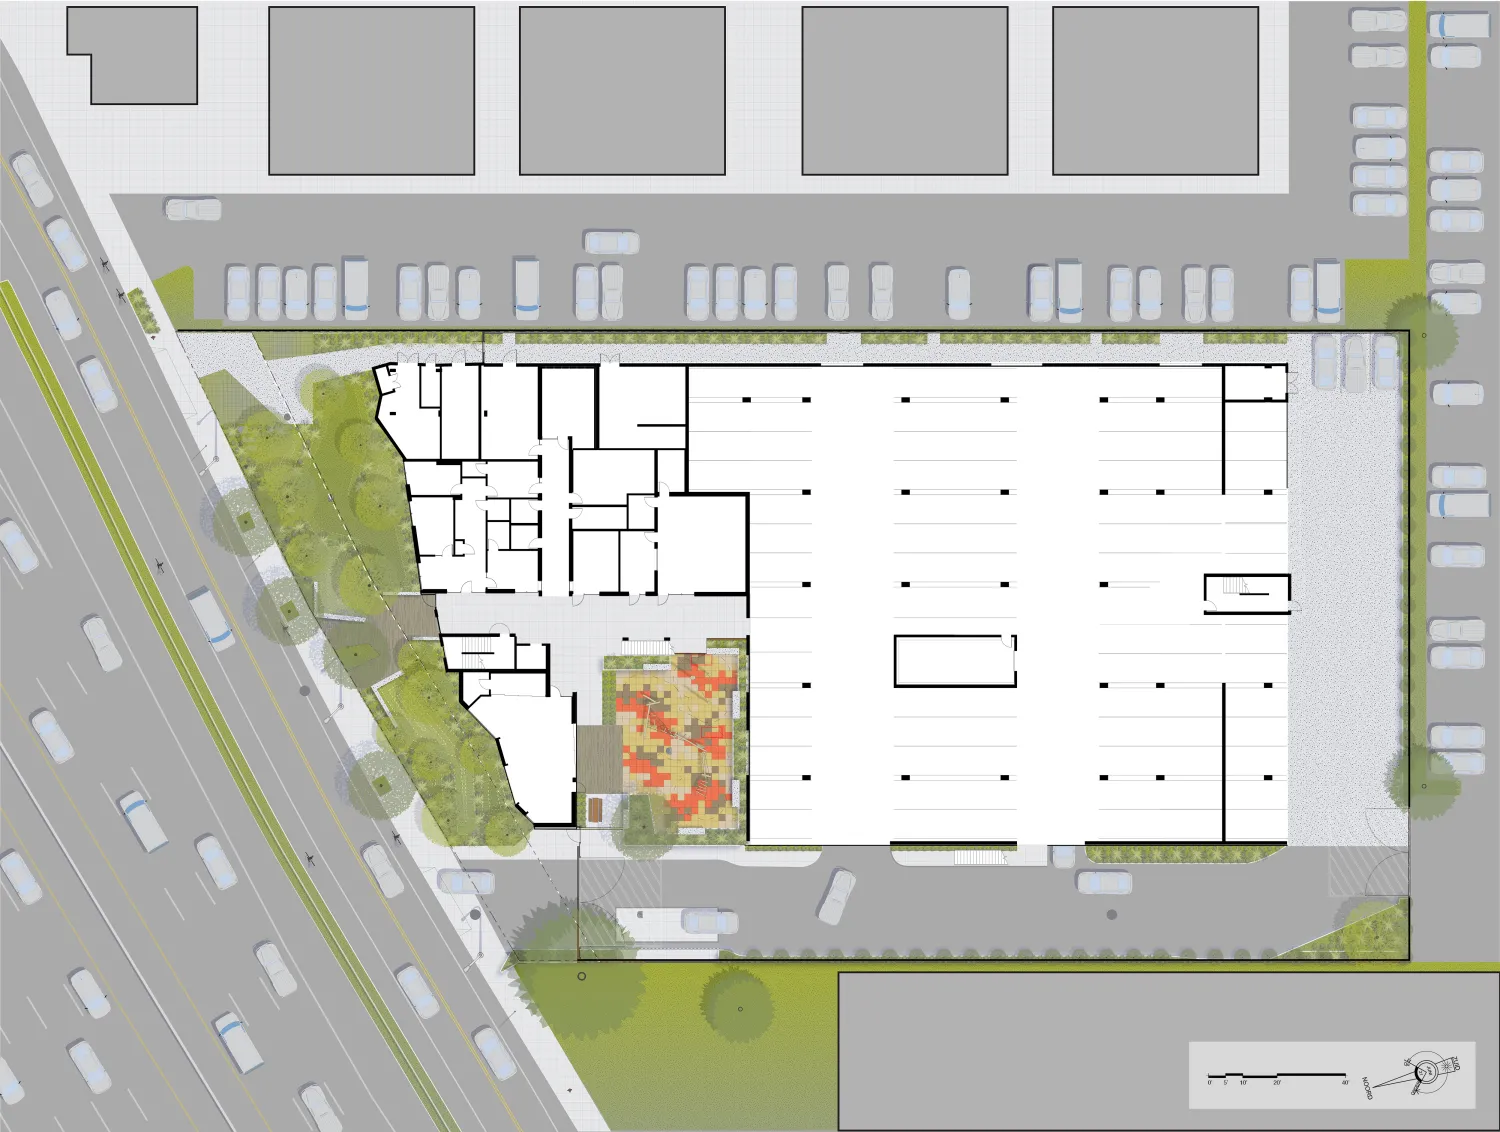 Level one site plan of Edwina Benner Plaza in Sunnyvale, Ca.